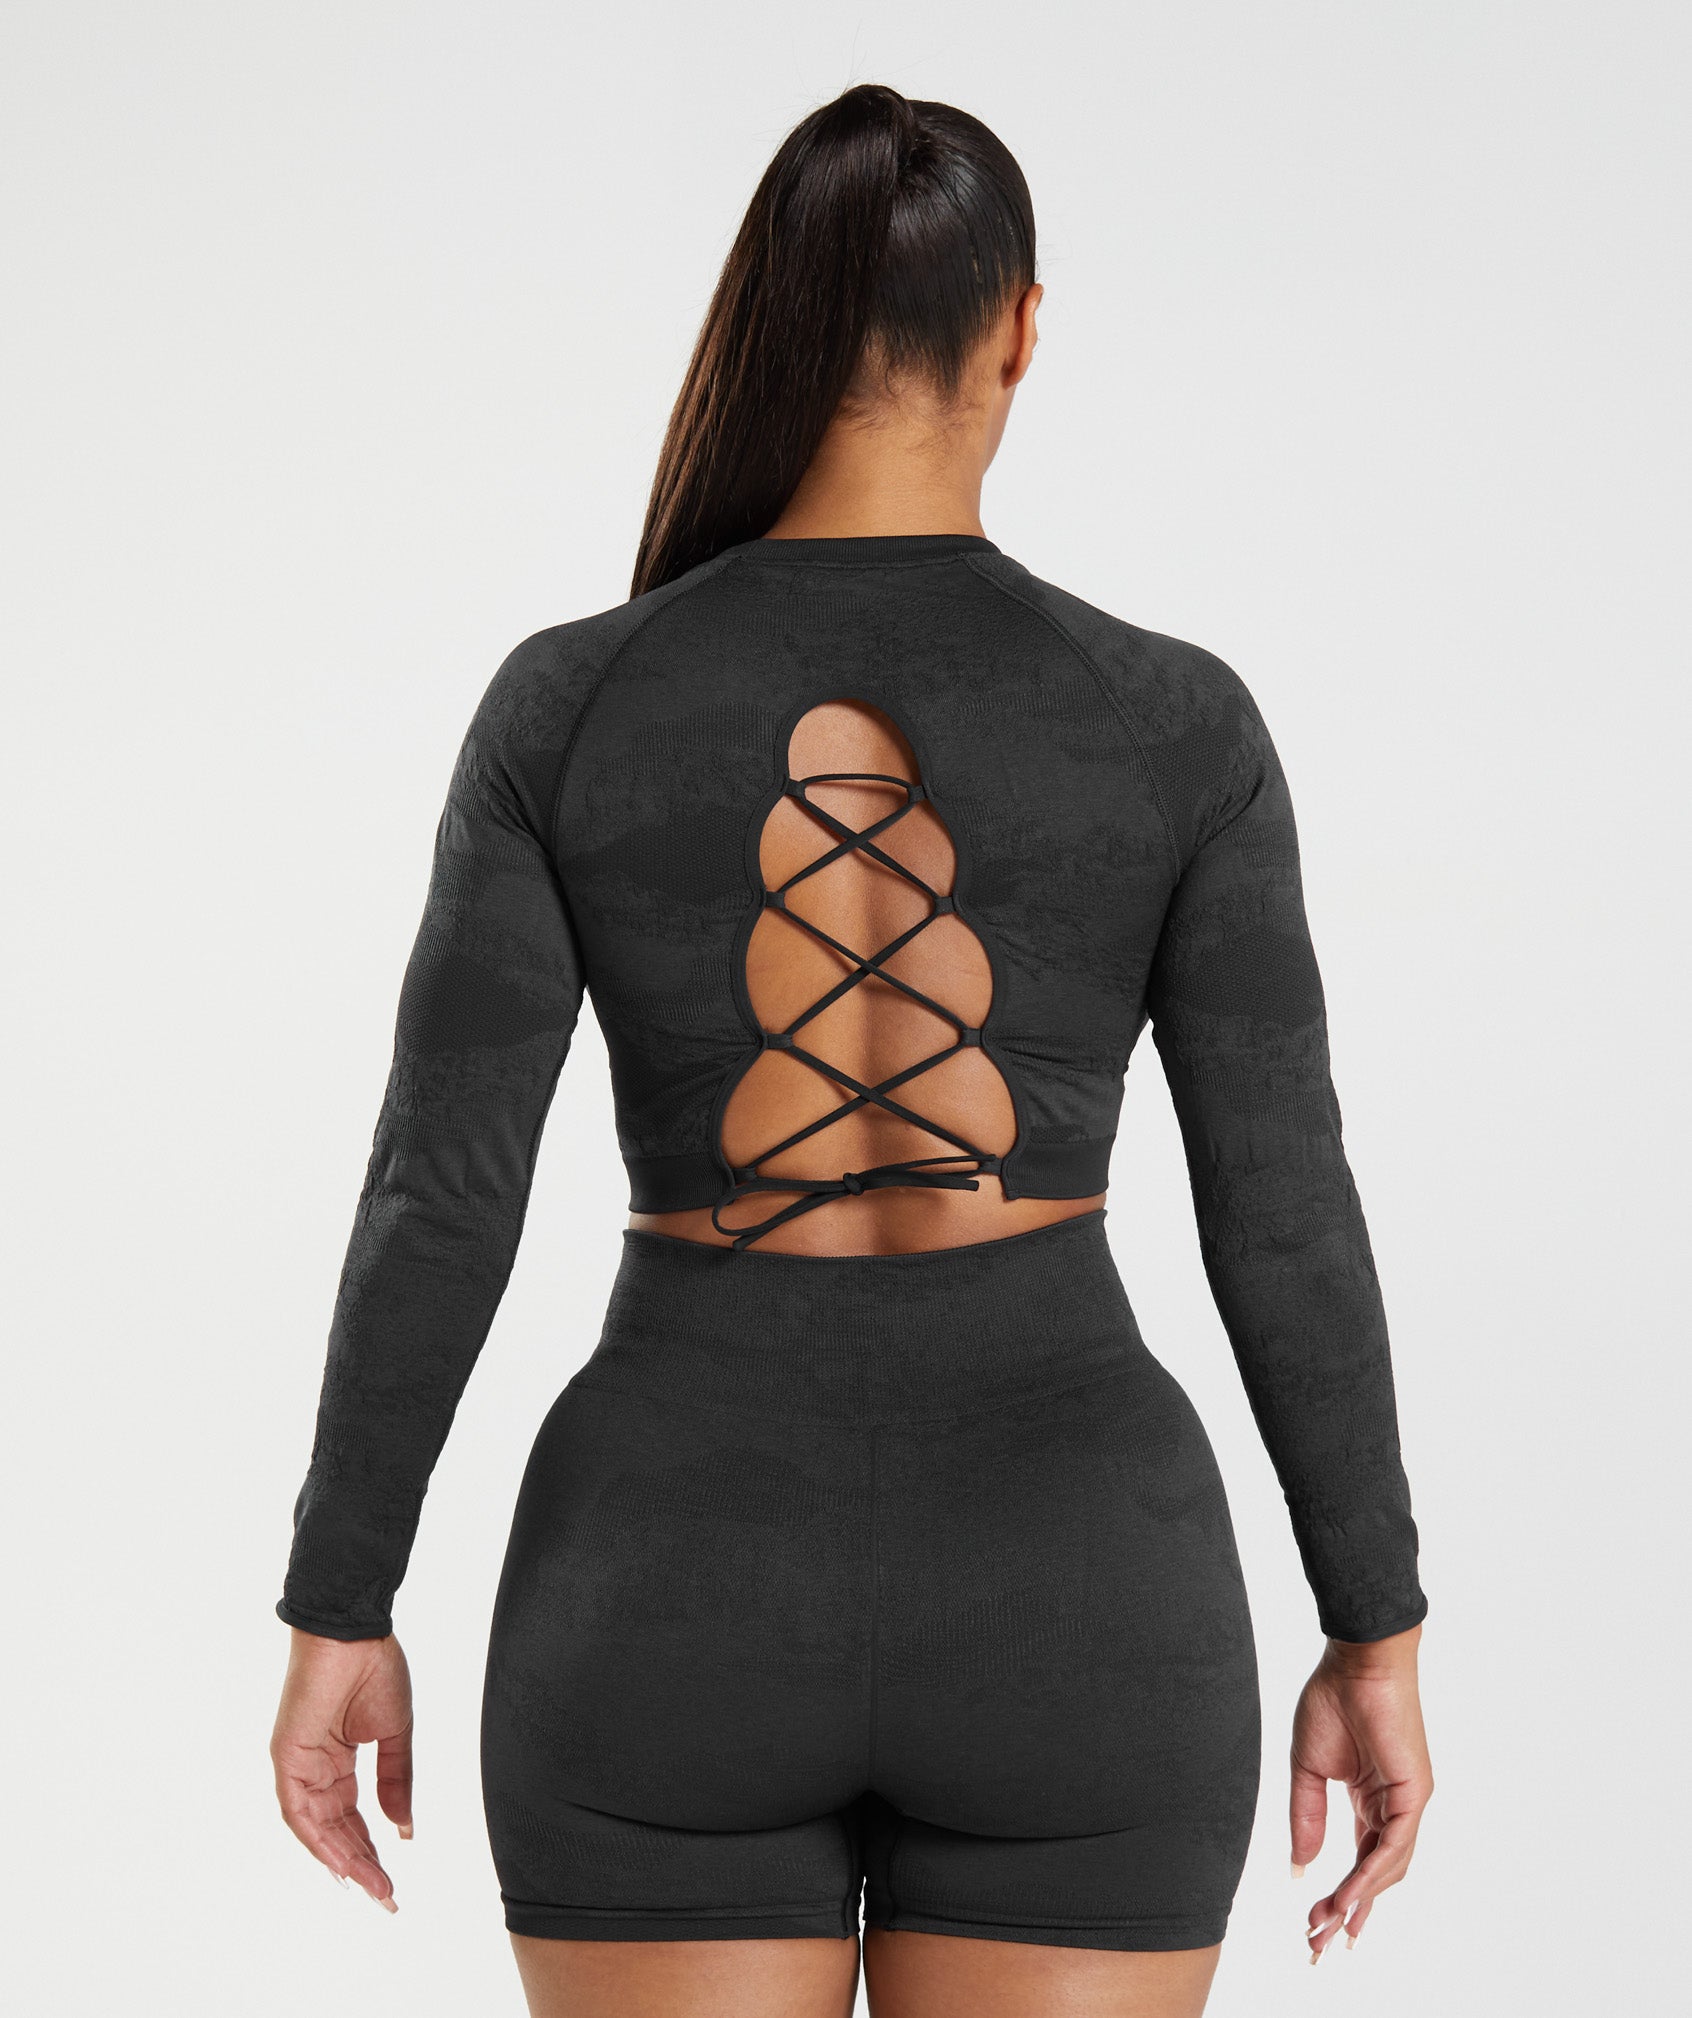 Adapt Camo Seamless Lace Up Back Top in Black/Onyx Grey - view 1